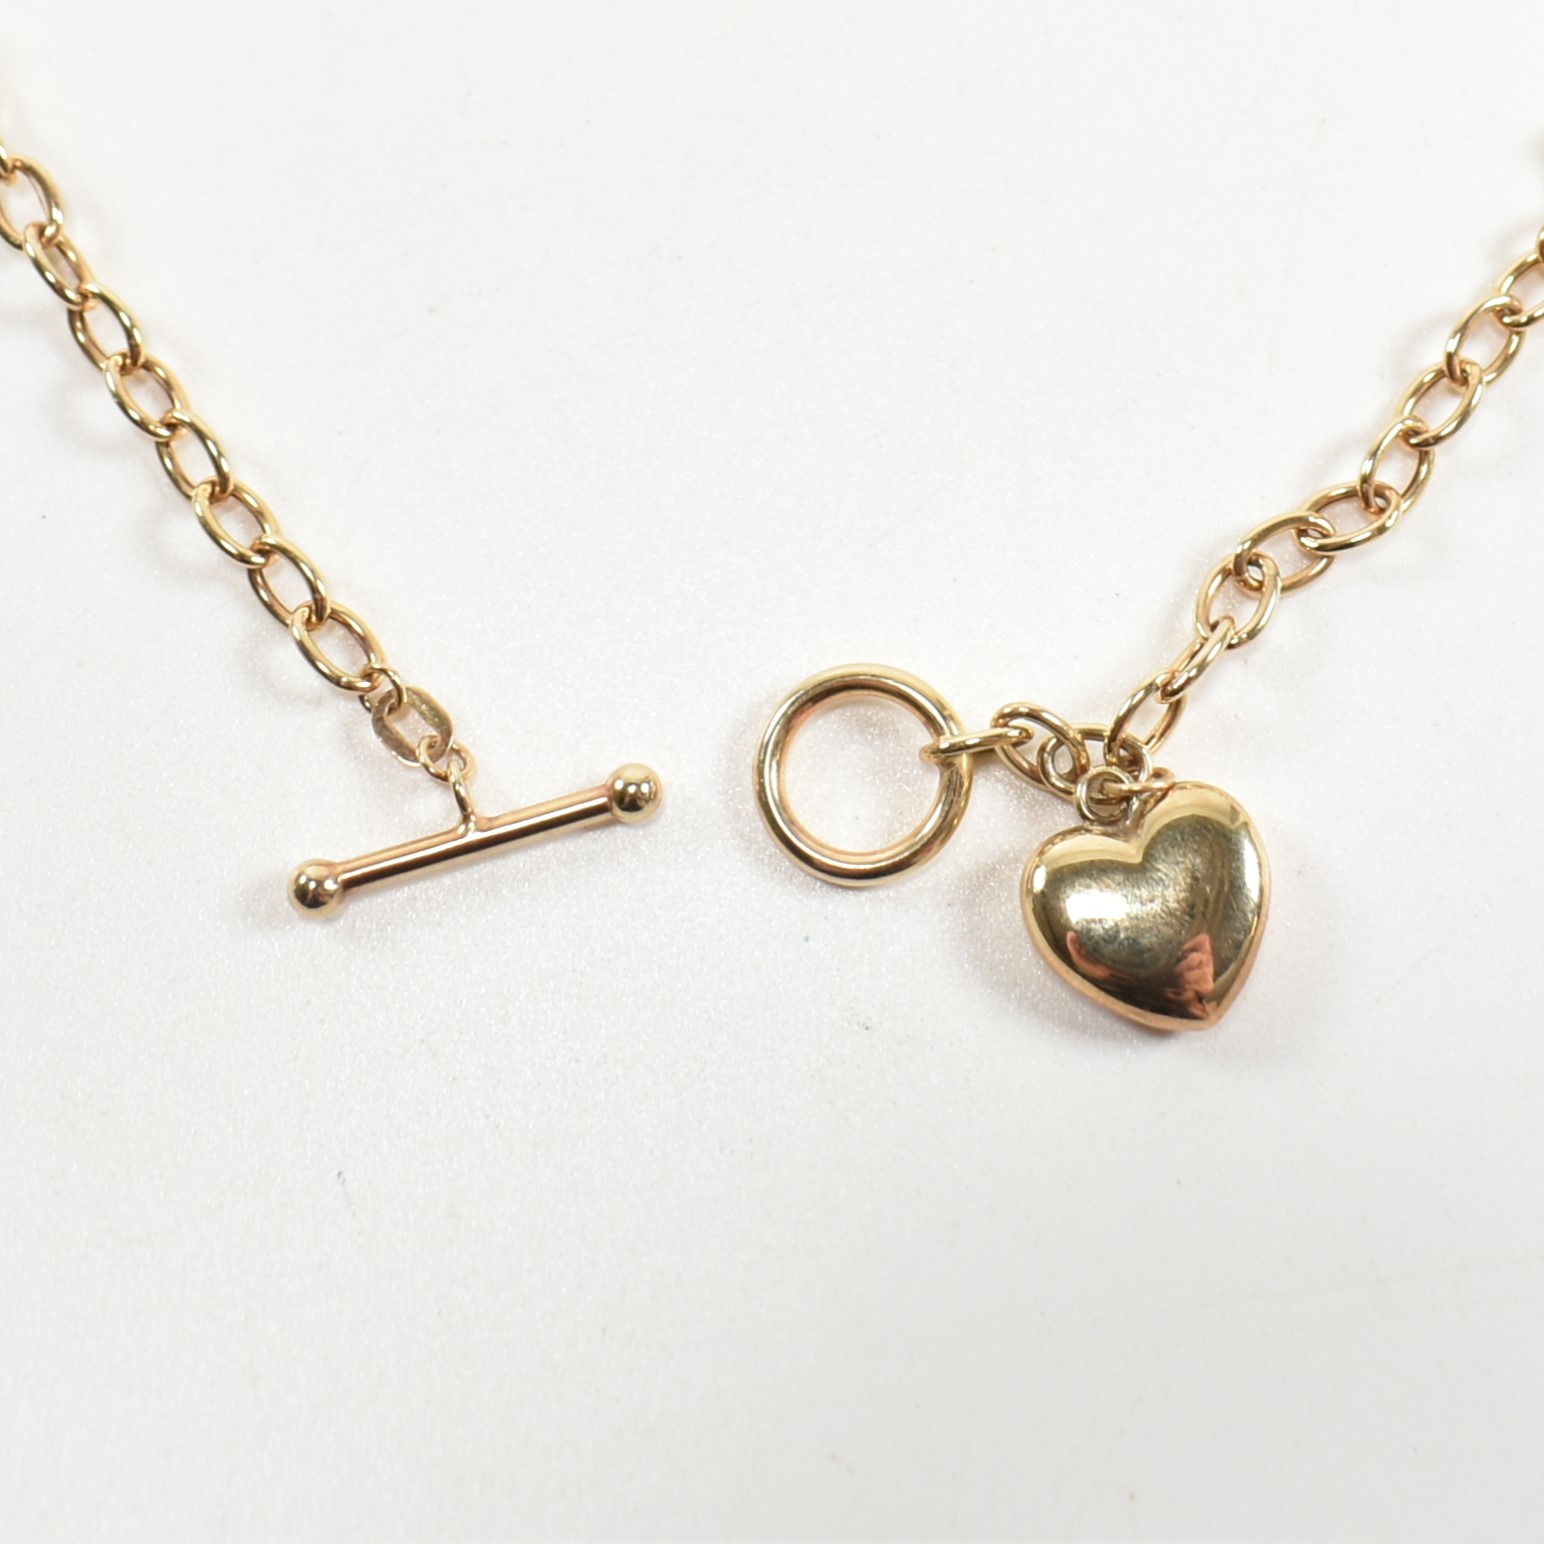 HALLMARKED 9CT GOLD T-BAR NECKLACE WITH HEART PENDANT - Image 4 of 5